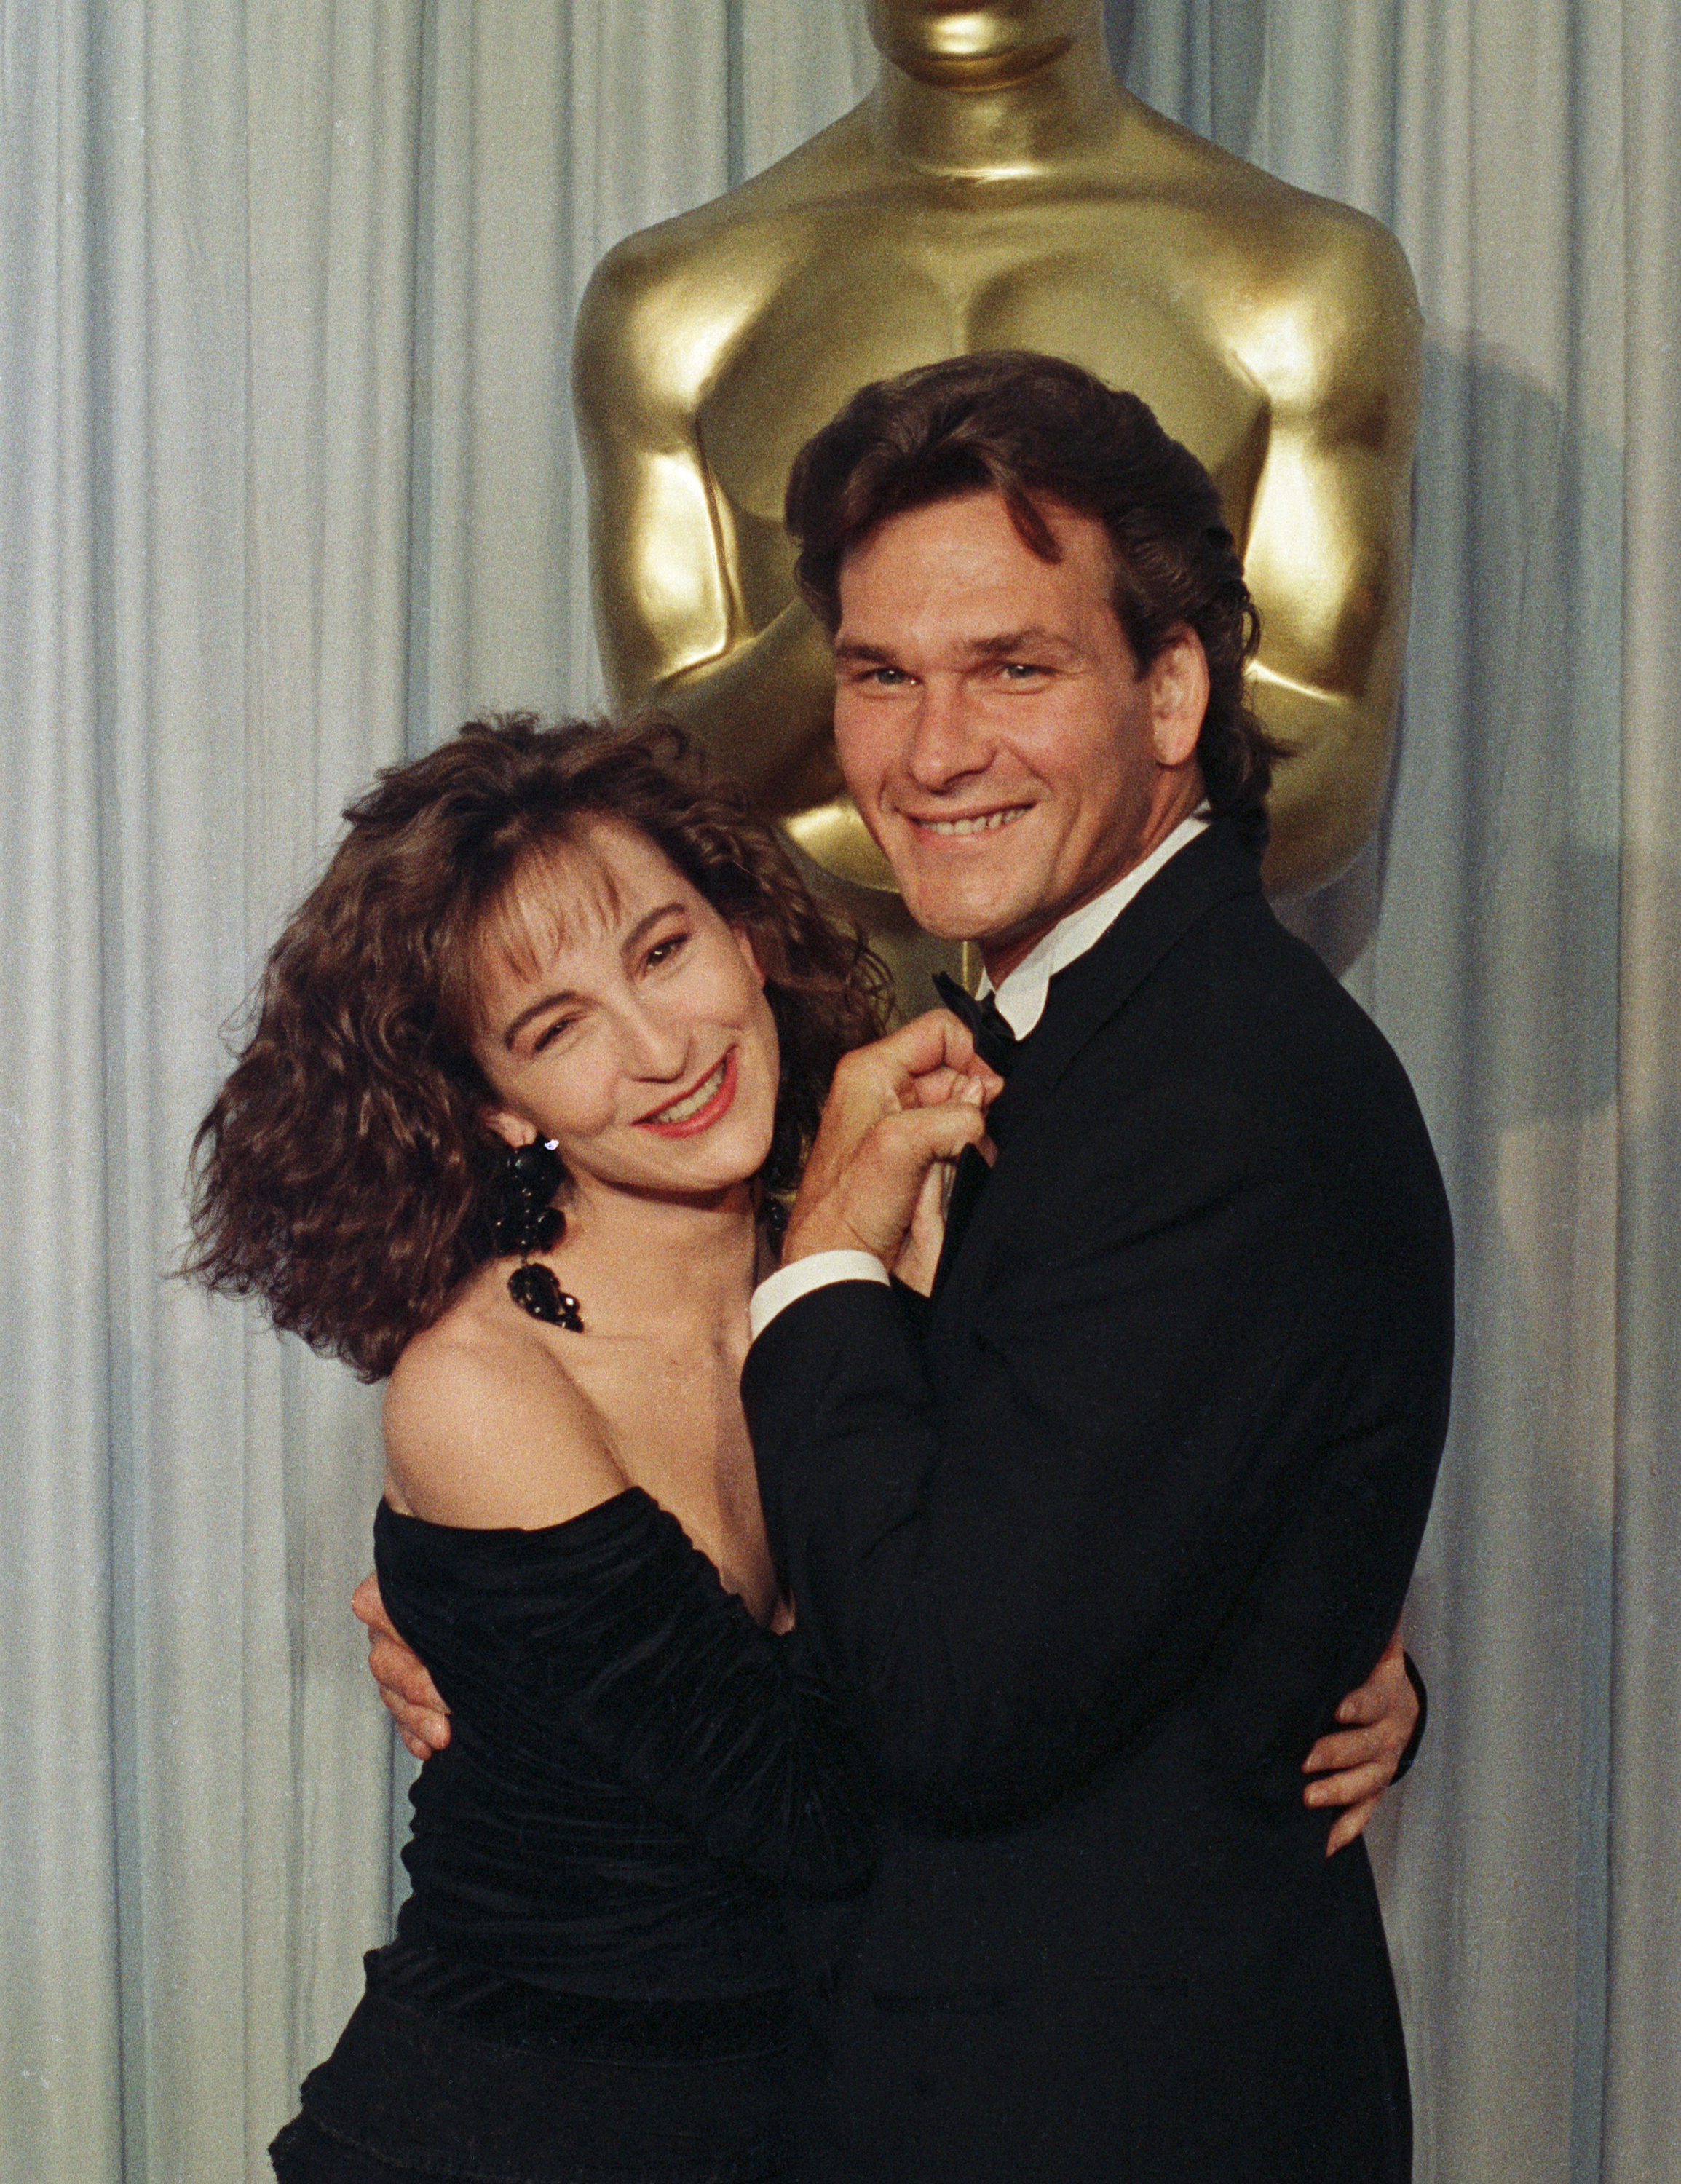 Jennifer Grey and Patrick Swayze at the Academy Awards in Los Angeles, California on April 11, 1988 | Source: Getty Images